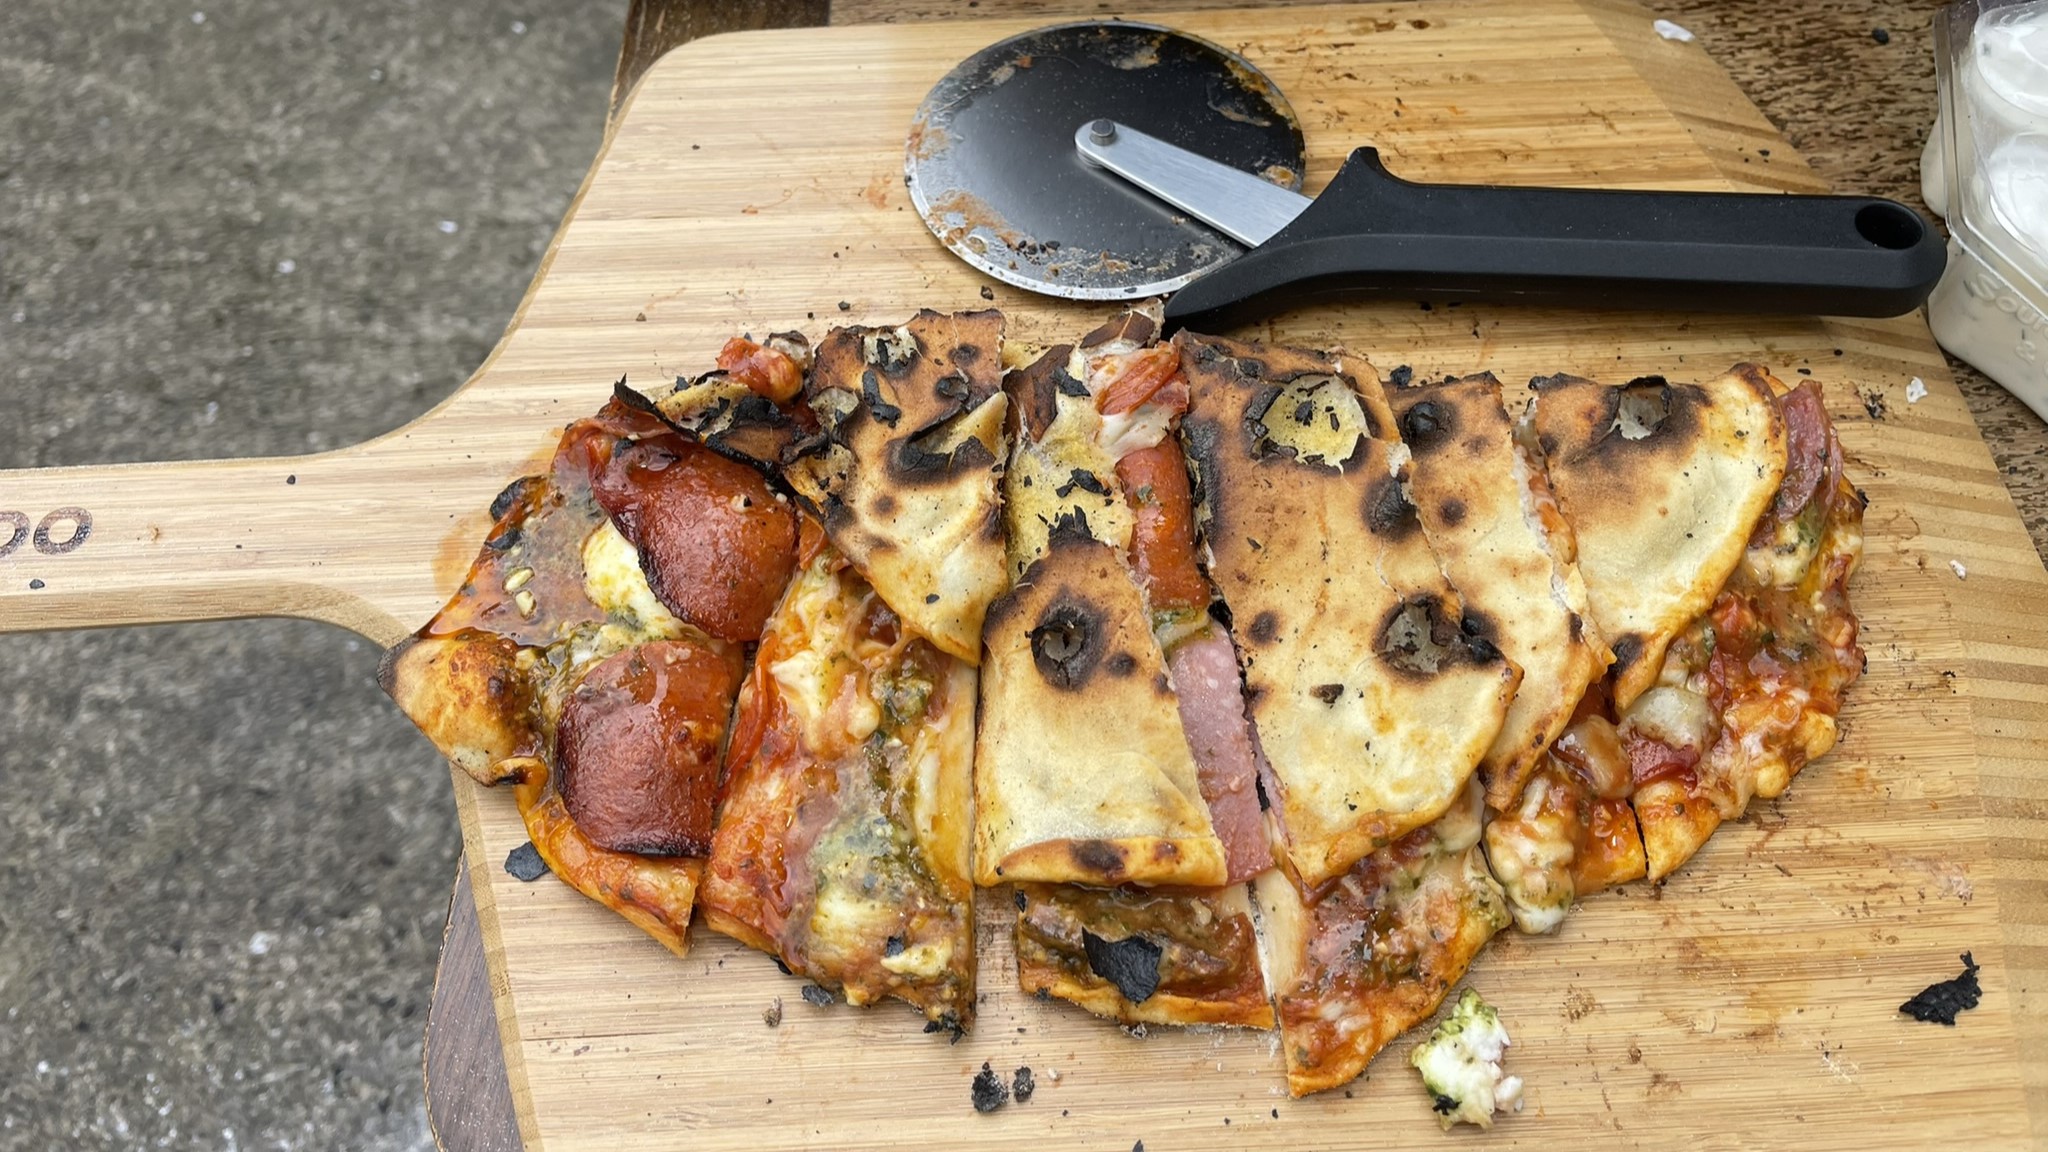 Burnt meat feast pizza from the Ooni Volt 12